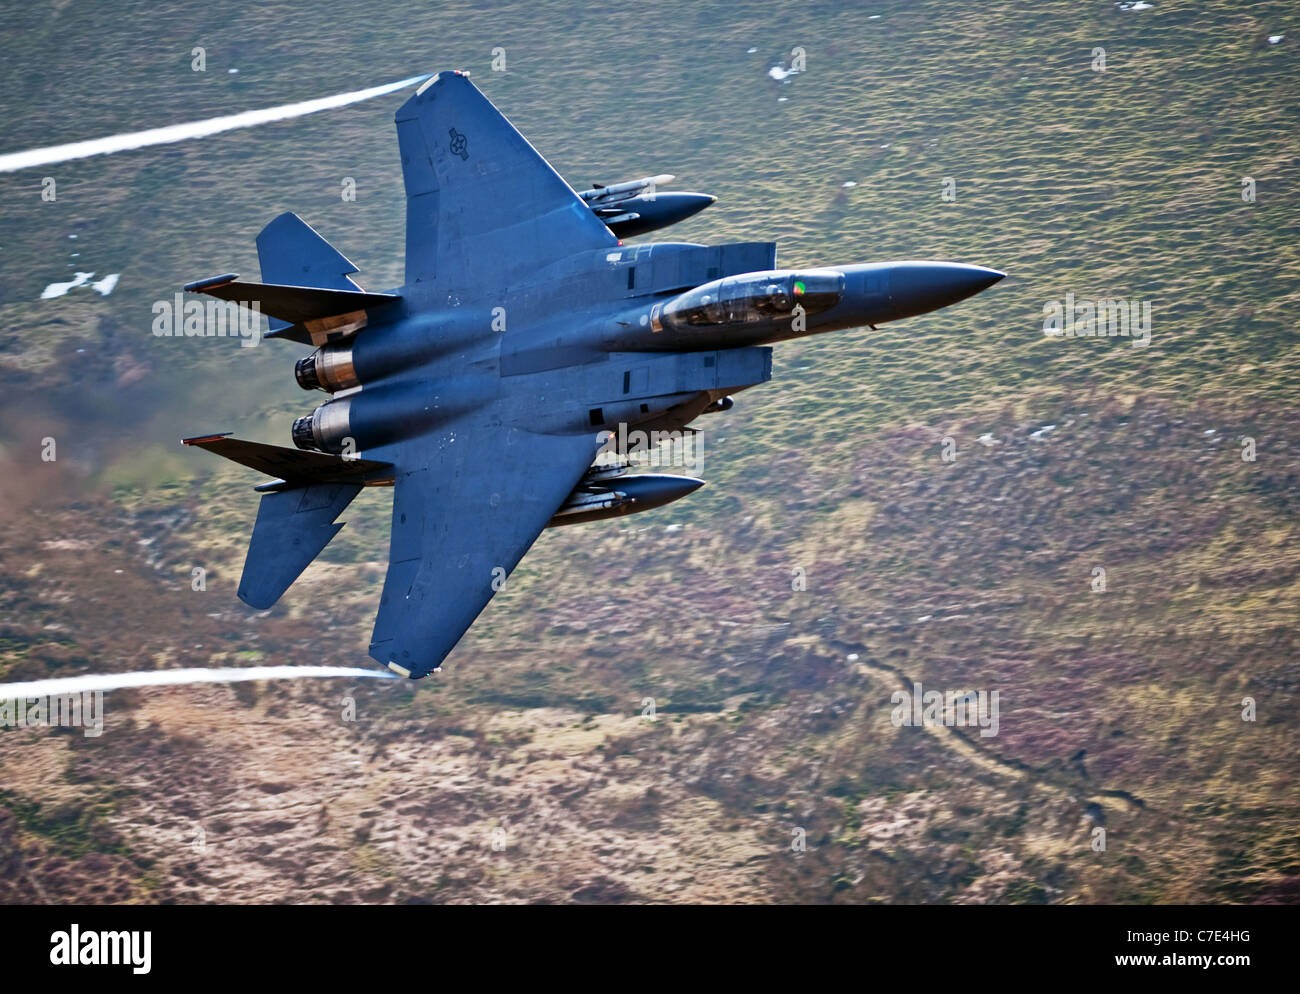 USAF F-15E Strike Eagle makes a turn during a low flying flight in mid Wales shot from the hill side Stock Photo